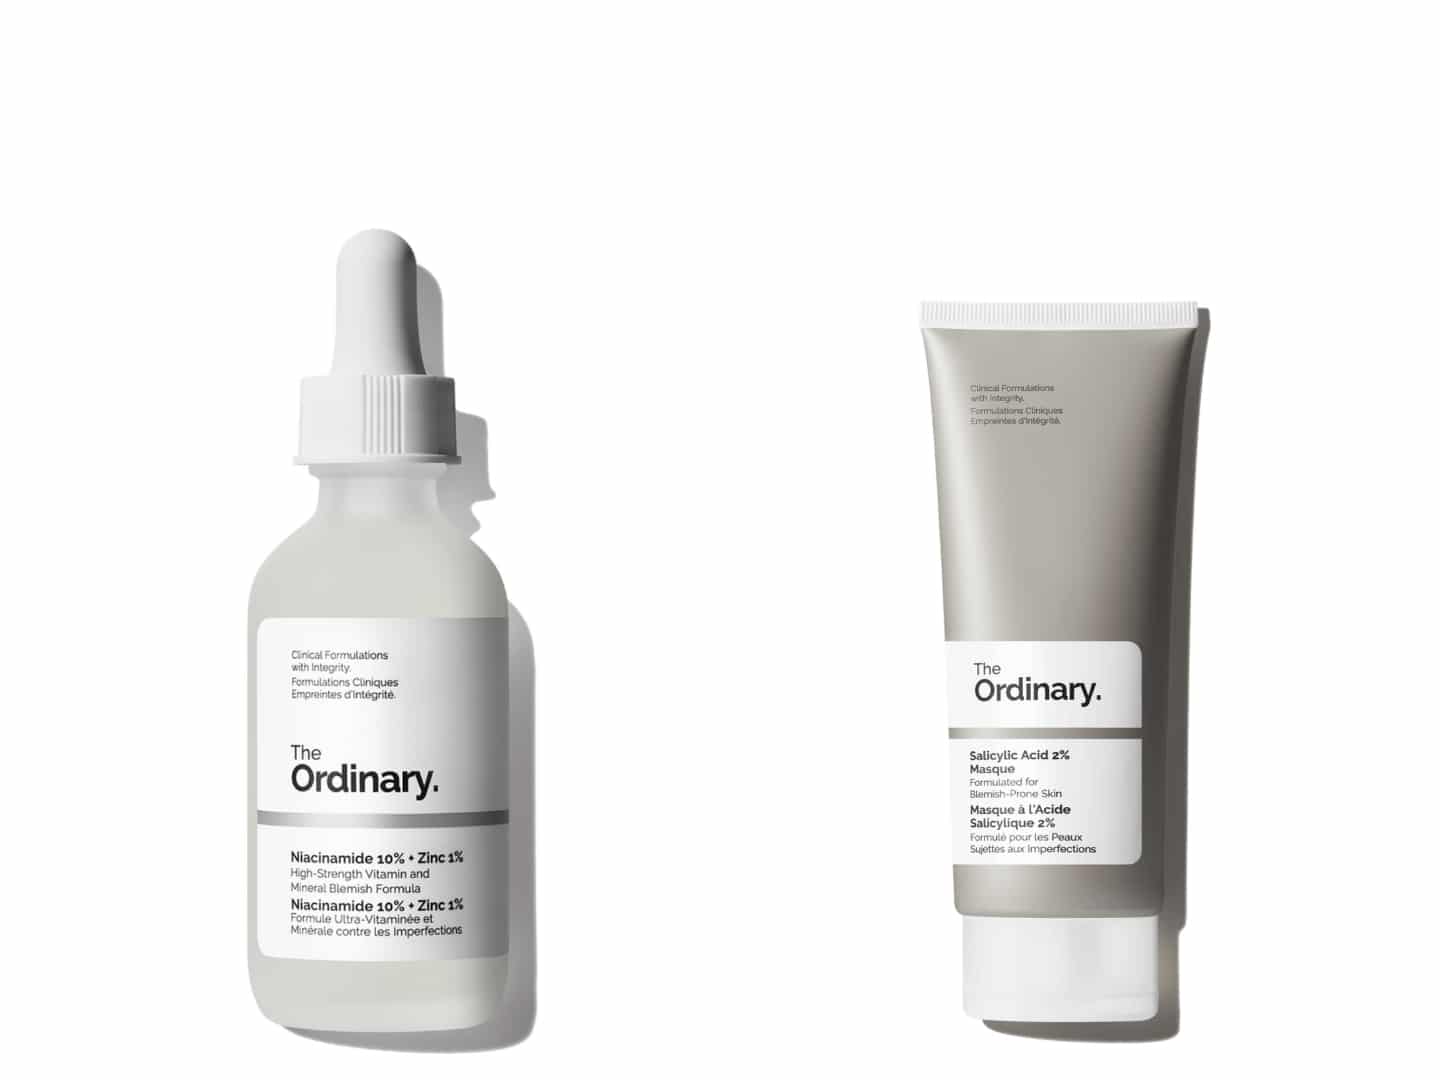 The Ordinary Niacinamide 10% + Zinc 1% and The Ordinary Salicylic Acid 2% Masque are discounted.